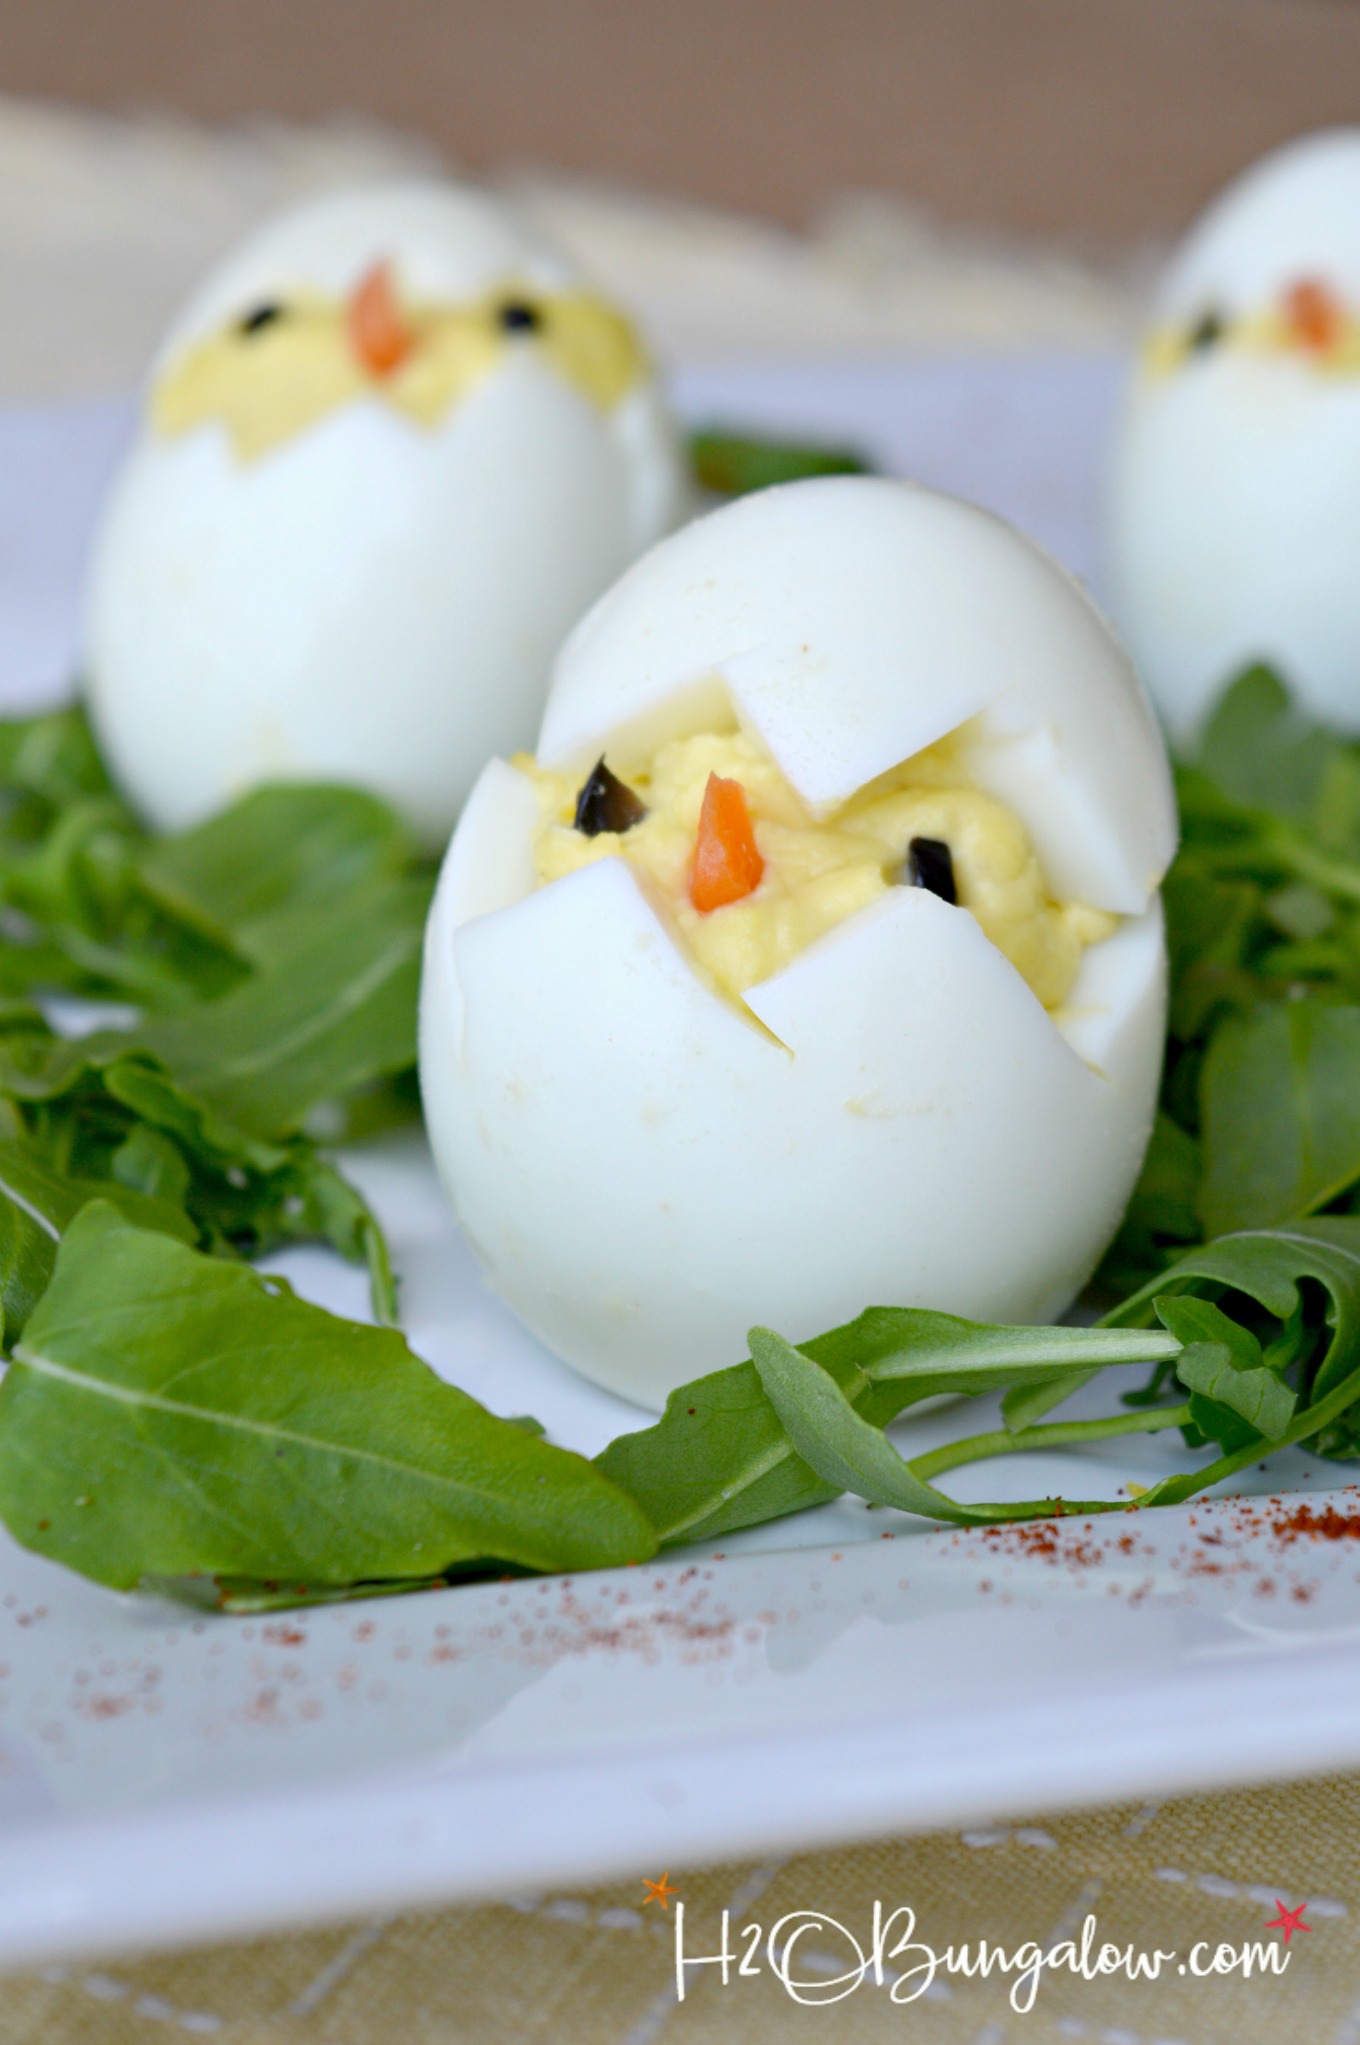 Easy to make deviled egg easter chick recipe and tutorial. They aren't hard to make but knowing a few tricks on how to make these cute chick deviled eggs is a must! Find them here at H2OBungalow